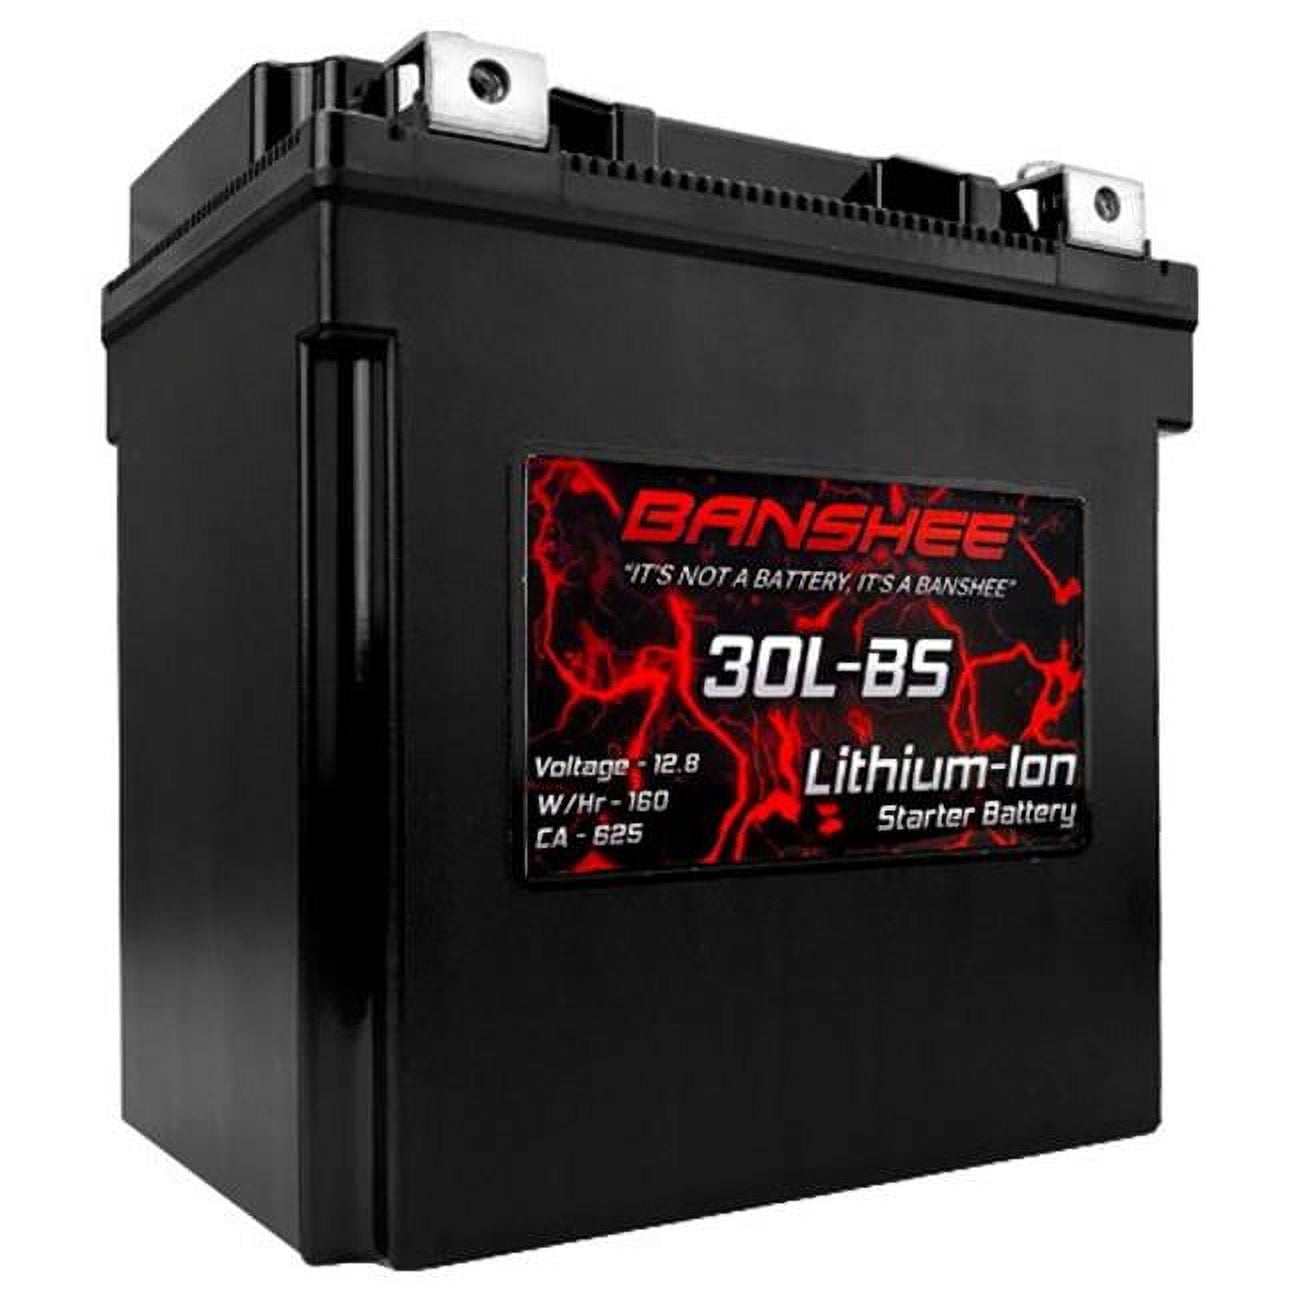 Picture of Banshee DLFP30L-BS-09 12.8V Lightweight Lithium LiFePO4 Battery for Replacement ETX30L-BS YTX30L-BS Harley Yuasa Powersports